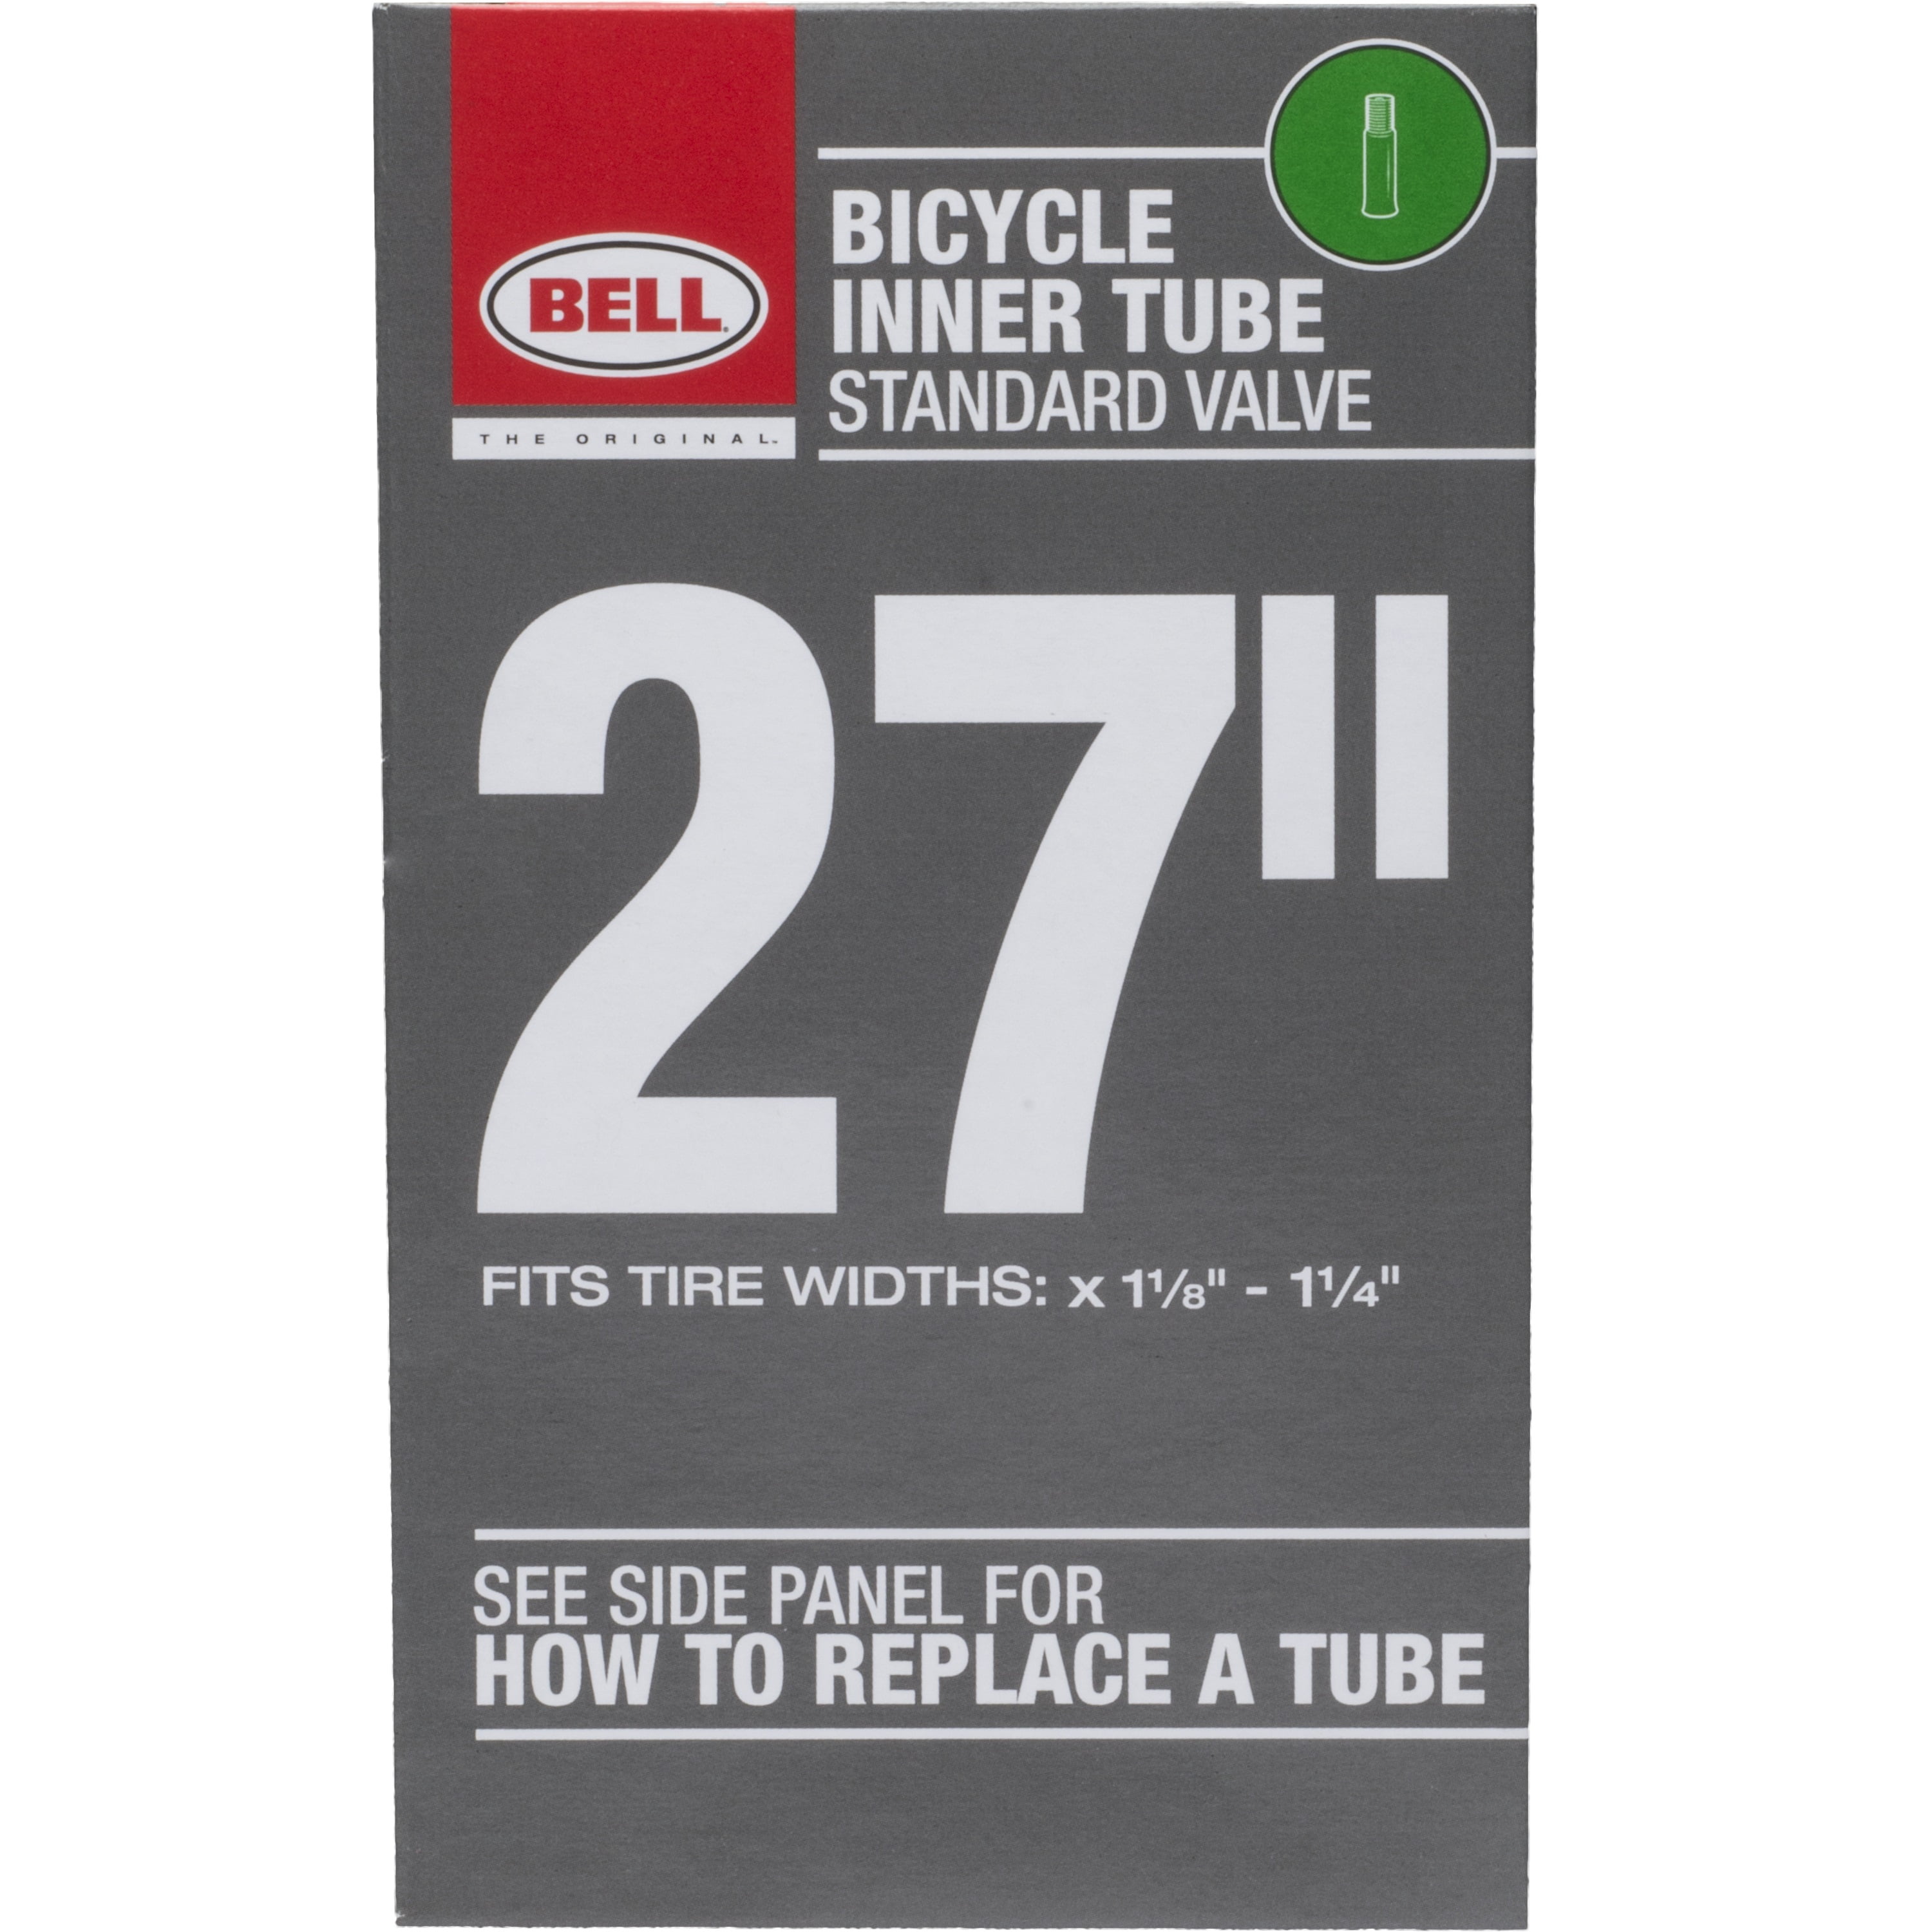 Bell 27" Bicycle Inner Tube Also Fits 700c Standard Valve Road Bikes for sale online 